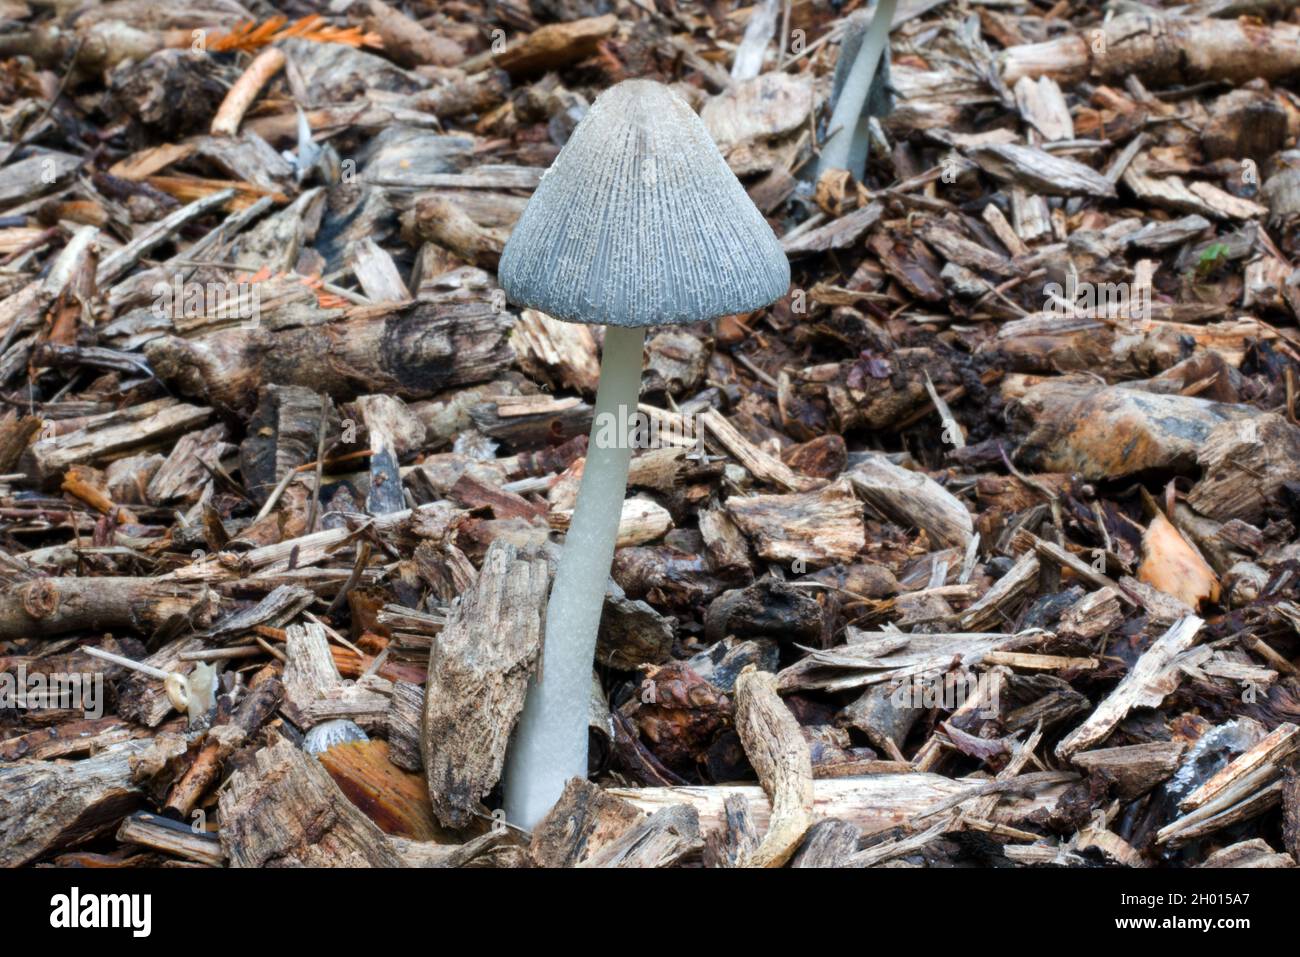 The fungus Coprinopsis lagopus grows solitarily or in groups on wood chips and compost heaps. It is widespread growing throughout the world. Stock Photo